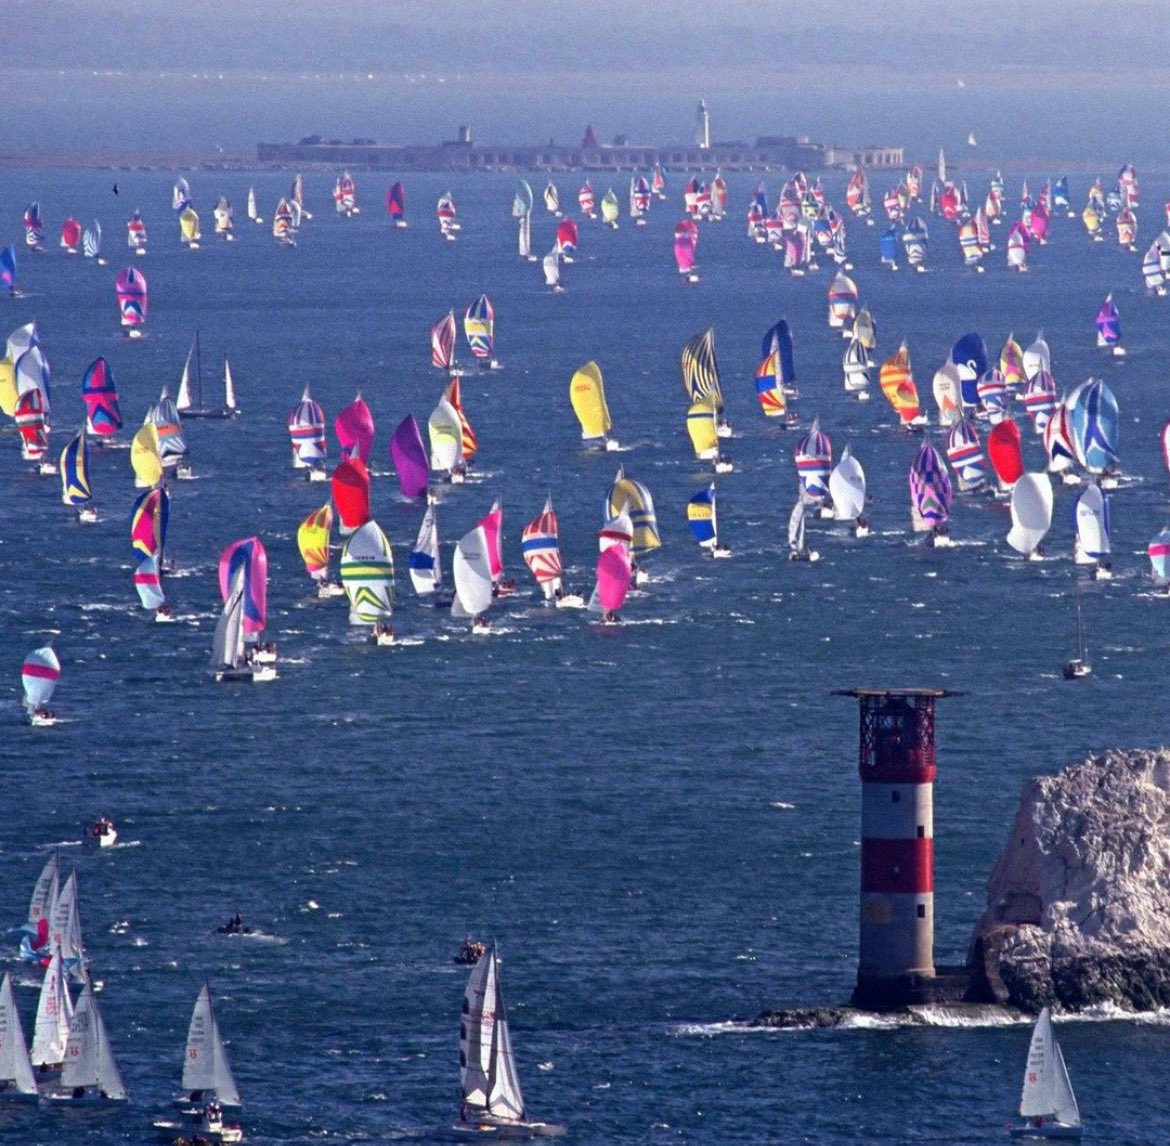 Competitors come from all over the world to follow the 50 nautical mile course round the Isle of Wight ❤️@RoundtheIsland You can see me just on the far right waving 👋 Starting on the famous Royal Yacht Squadron line in @ilovecowes , the fleet races westabout, to